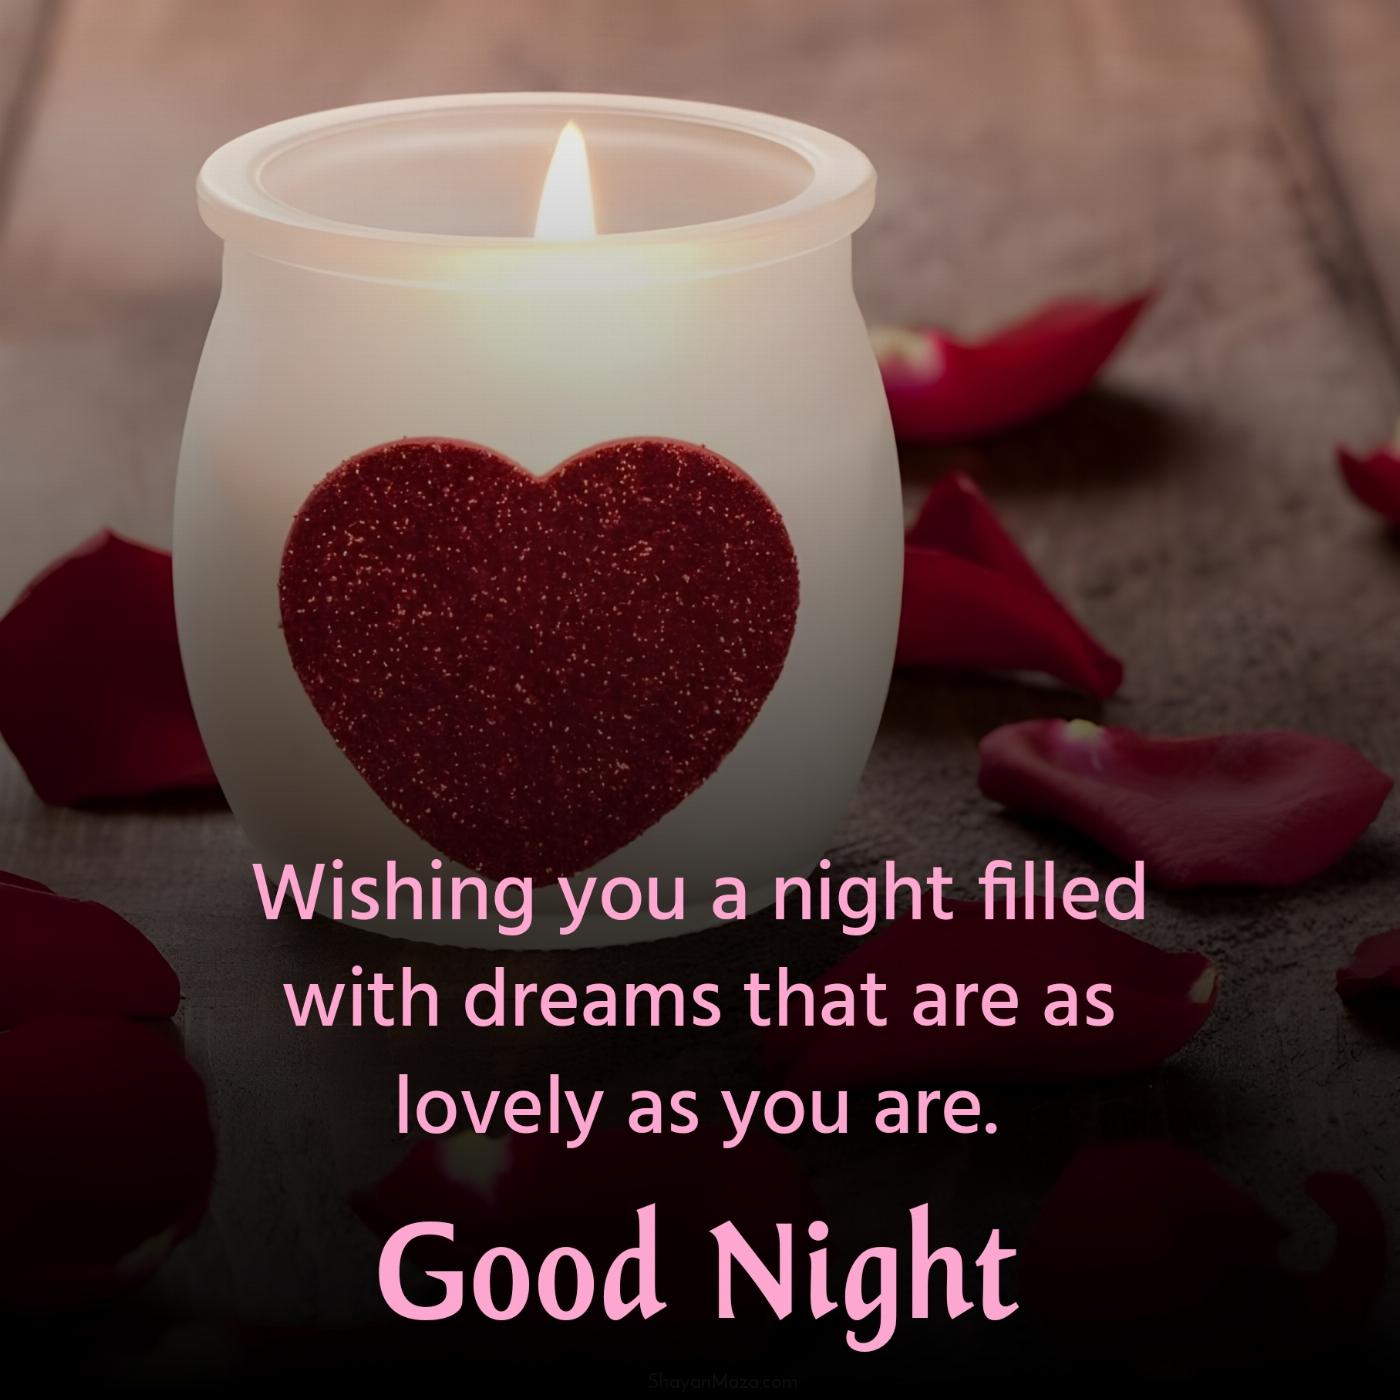 Wishing you a night filled with dreams that are as lovely as you